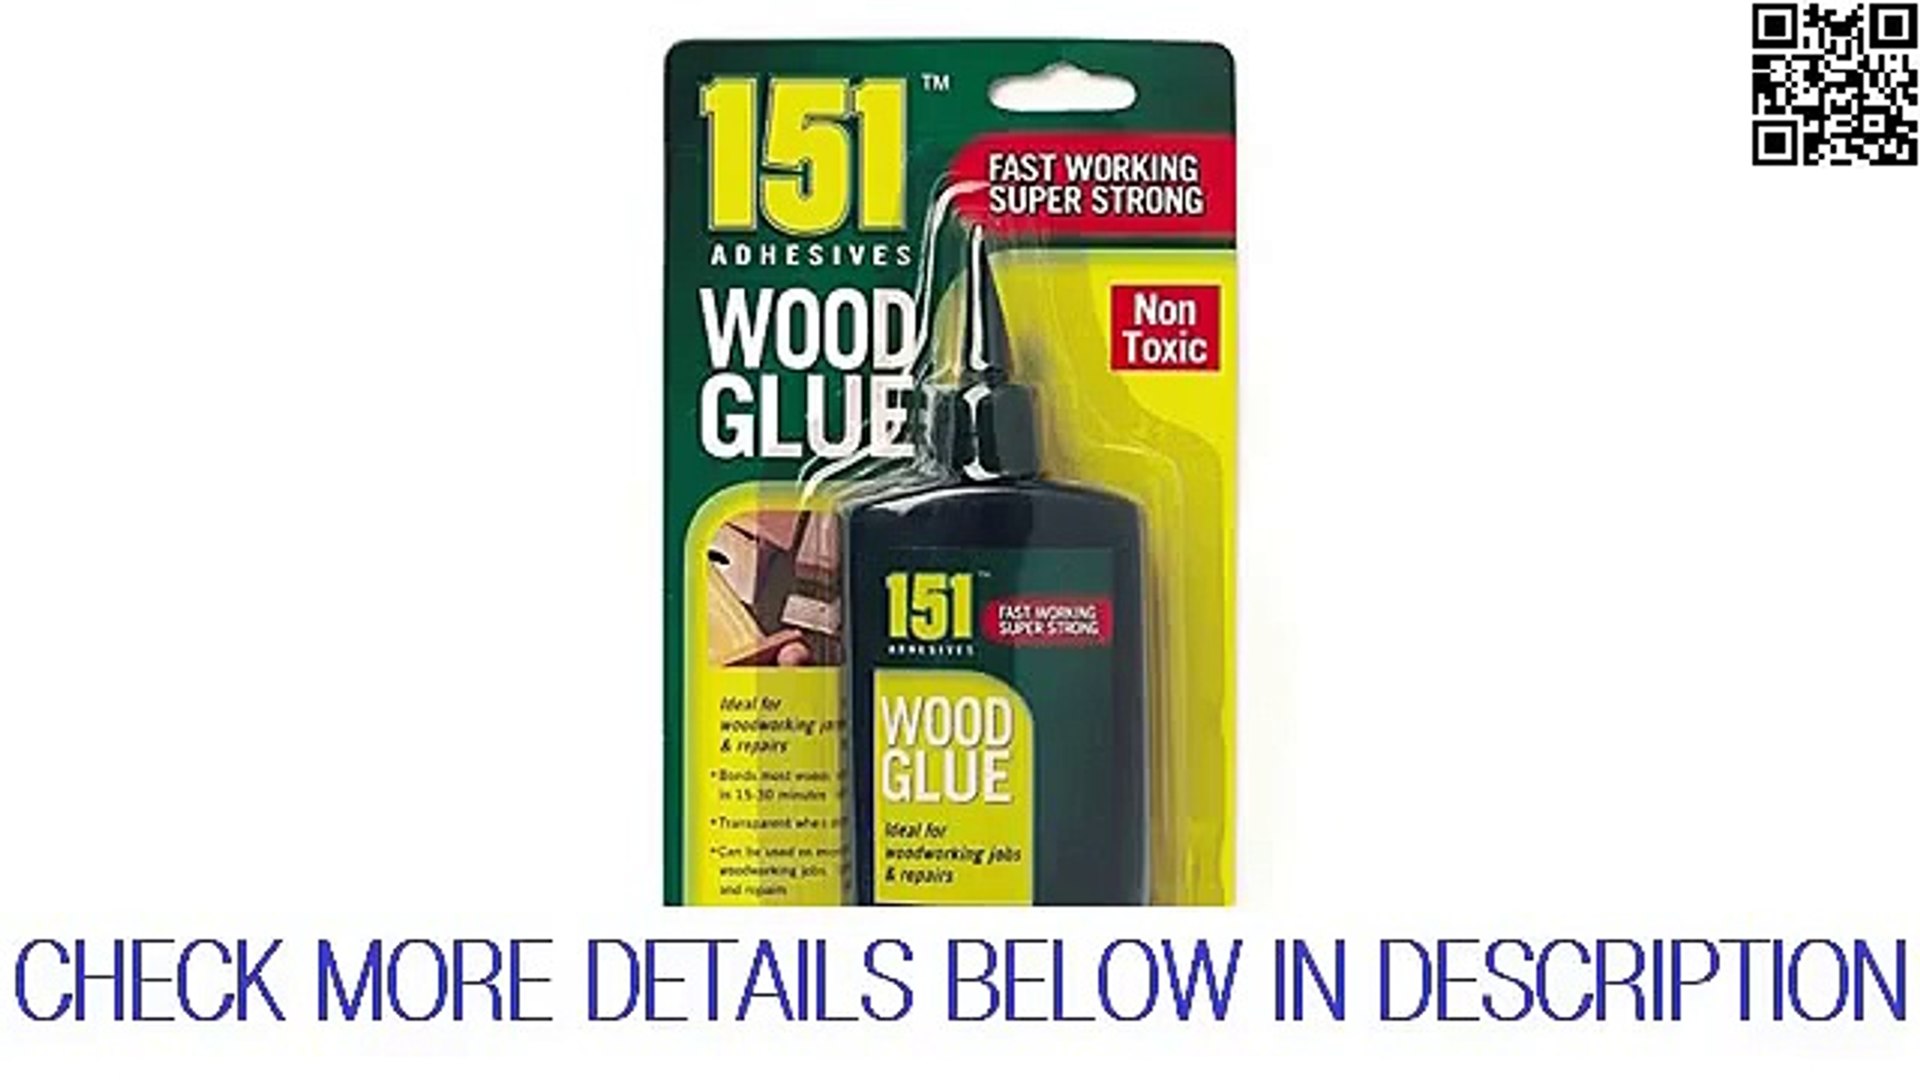 WOOD GLUE PVA FAST WORKING SUPER STRONG NON TOXIC120G 2015